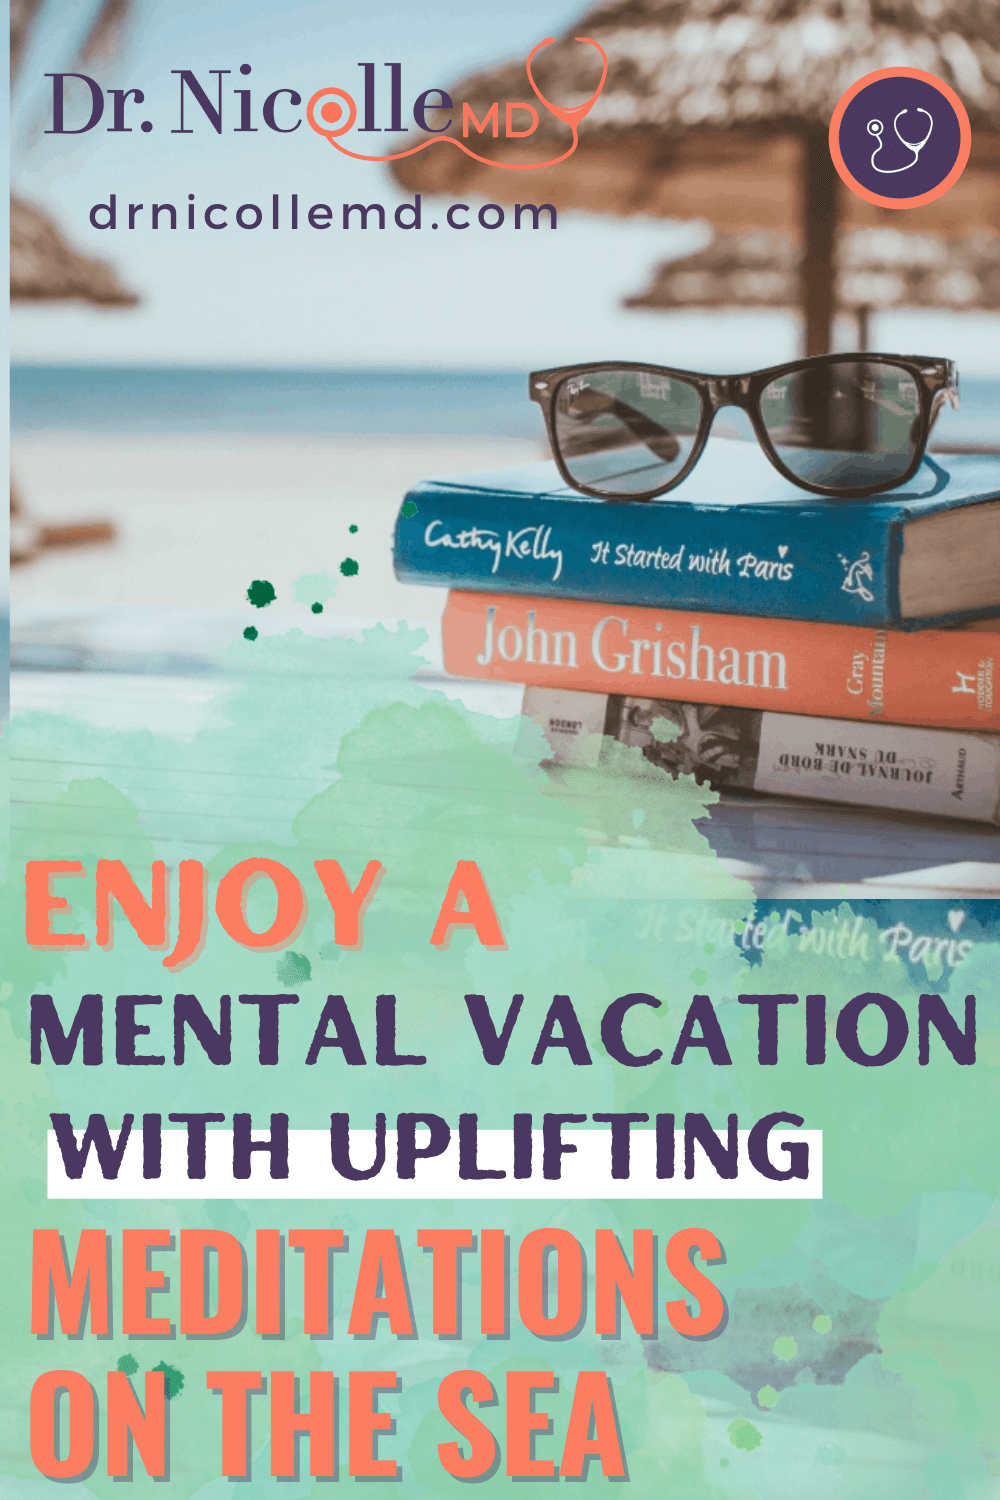 Enjoy a Mental Vacation With Uplifting Meditations on the Sea